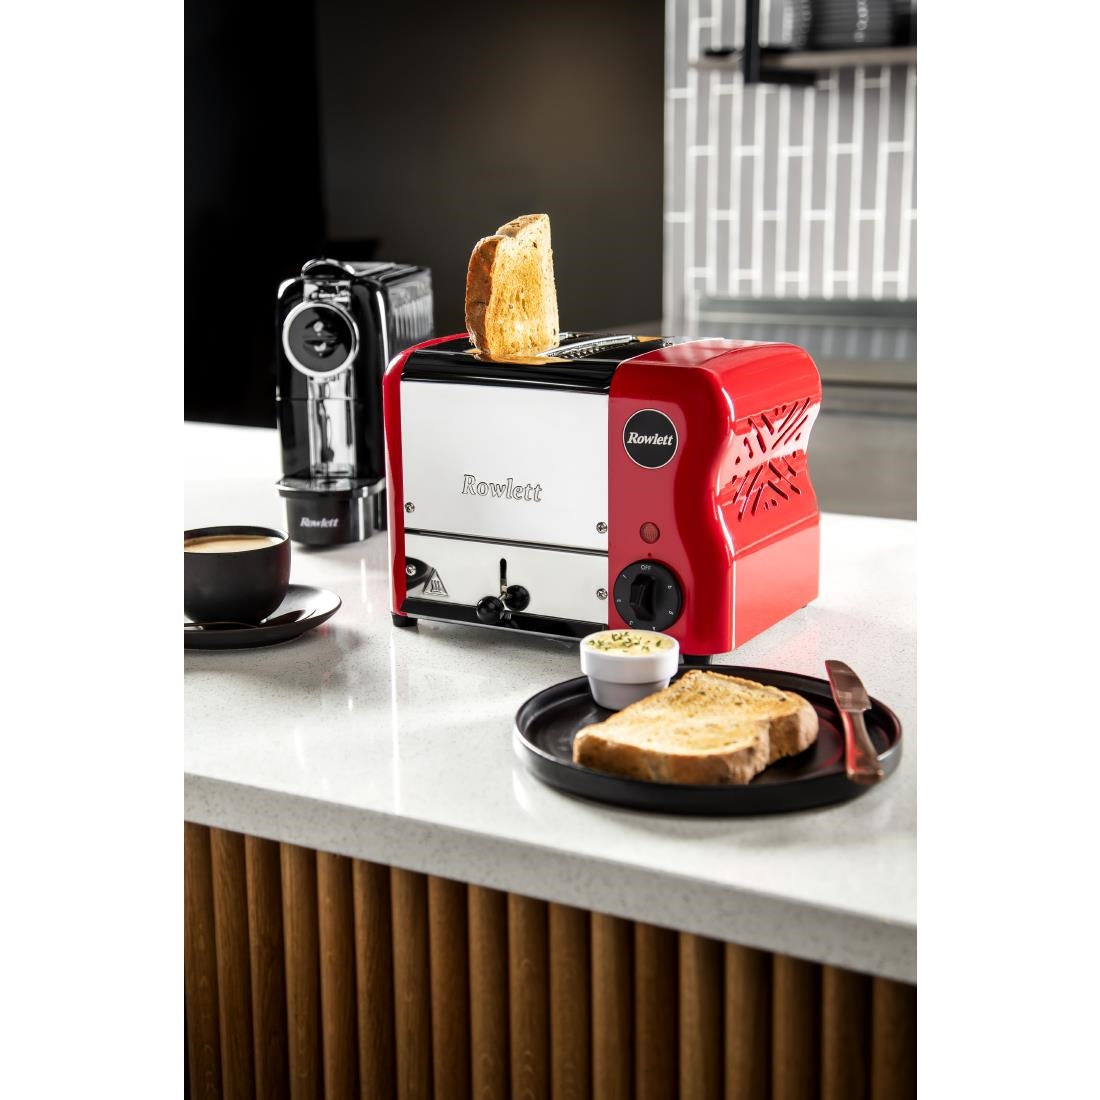 CH180 Rowlett Esprit 2 Slot Toaster Traffic Red w/2 Additional Elements & Sandwich Cage JD Catering Equipment Solutions Ltd